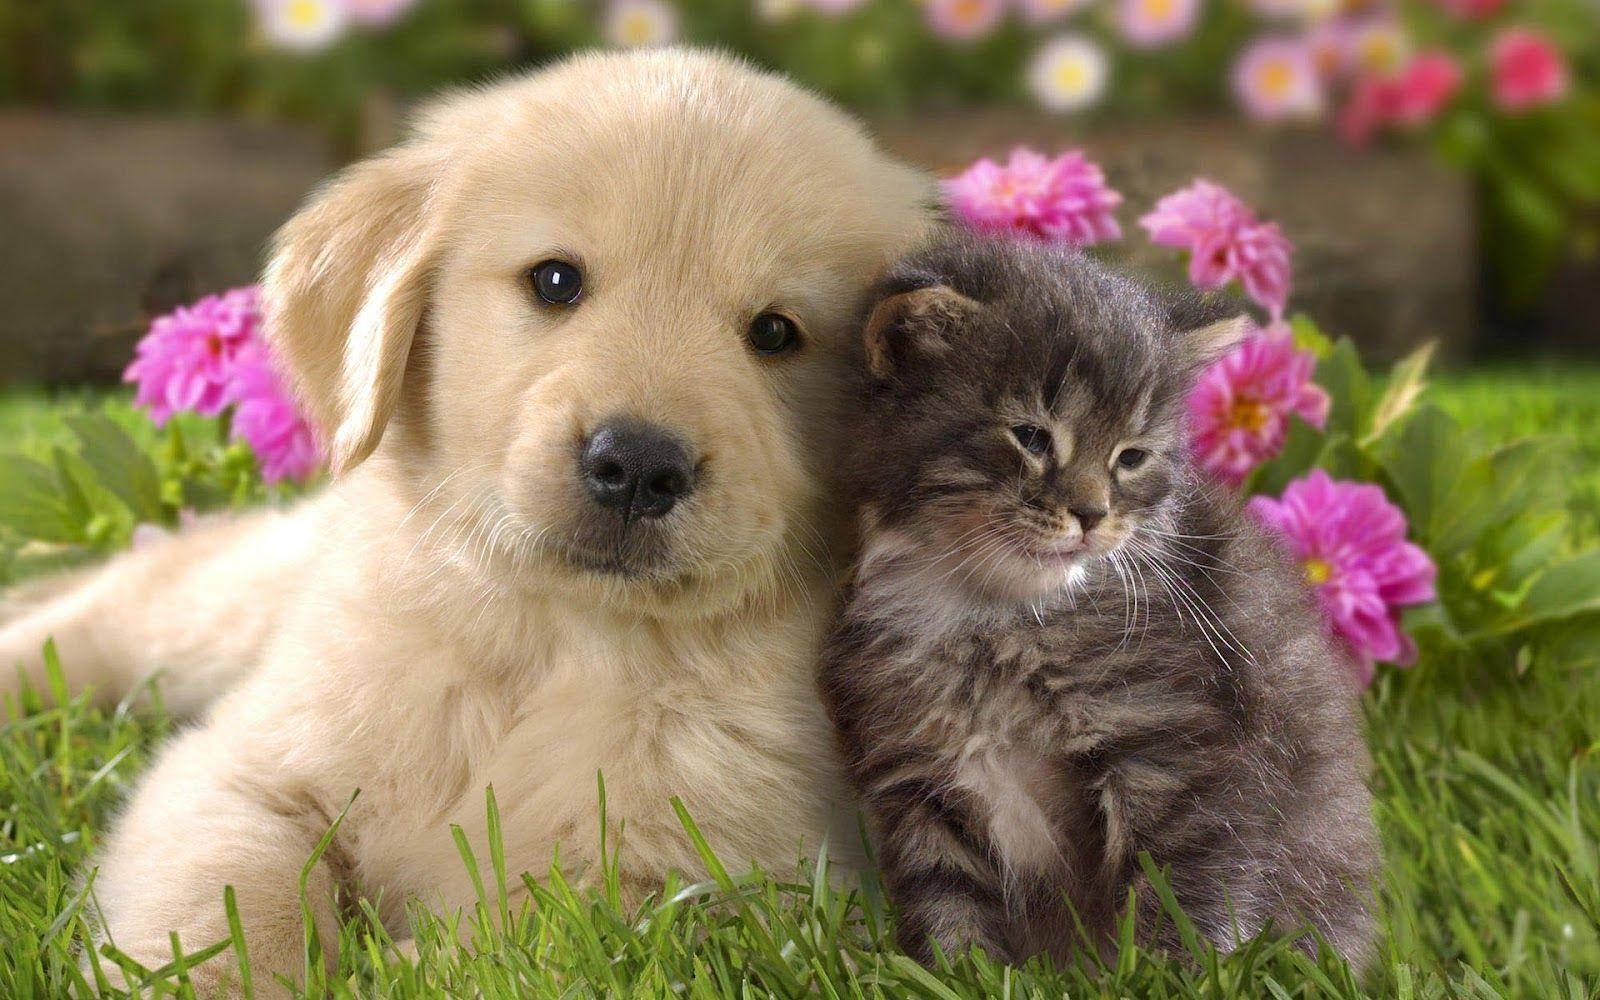 Cute Cats And DogsWallpapers